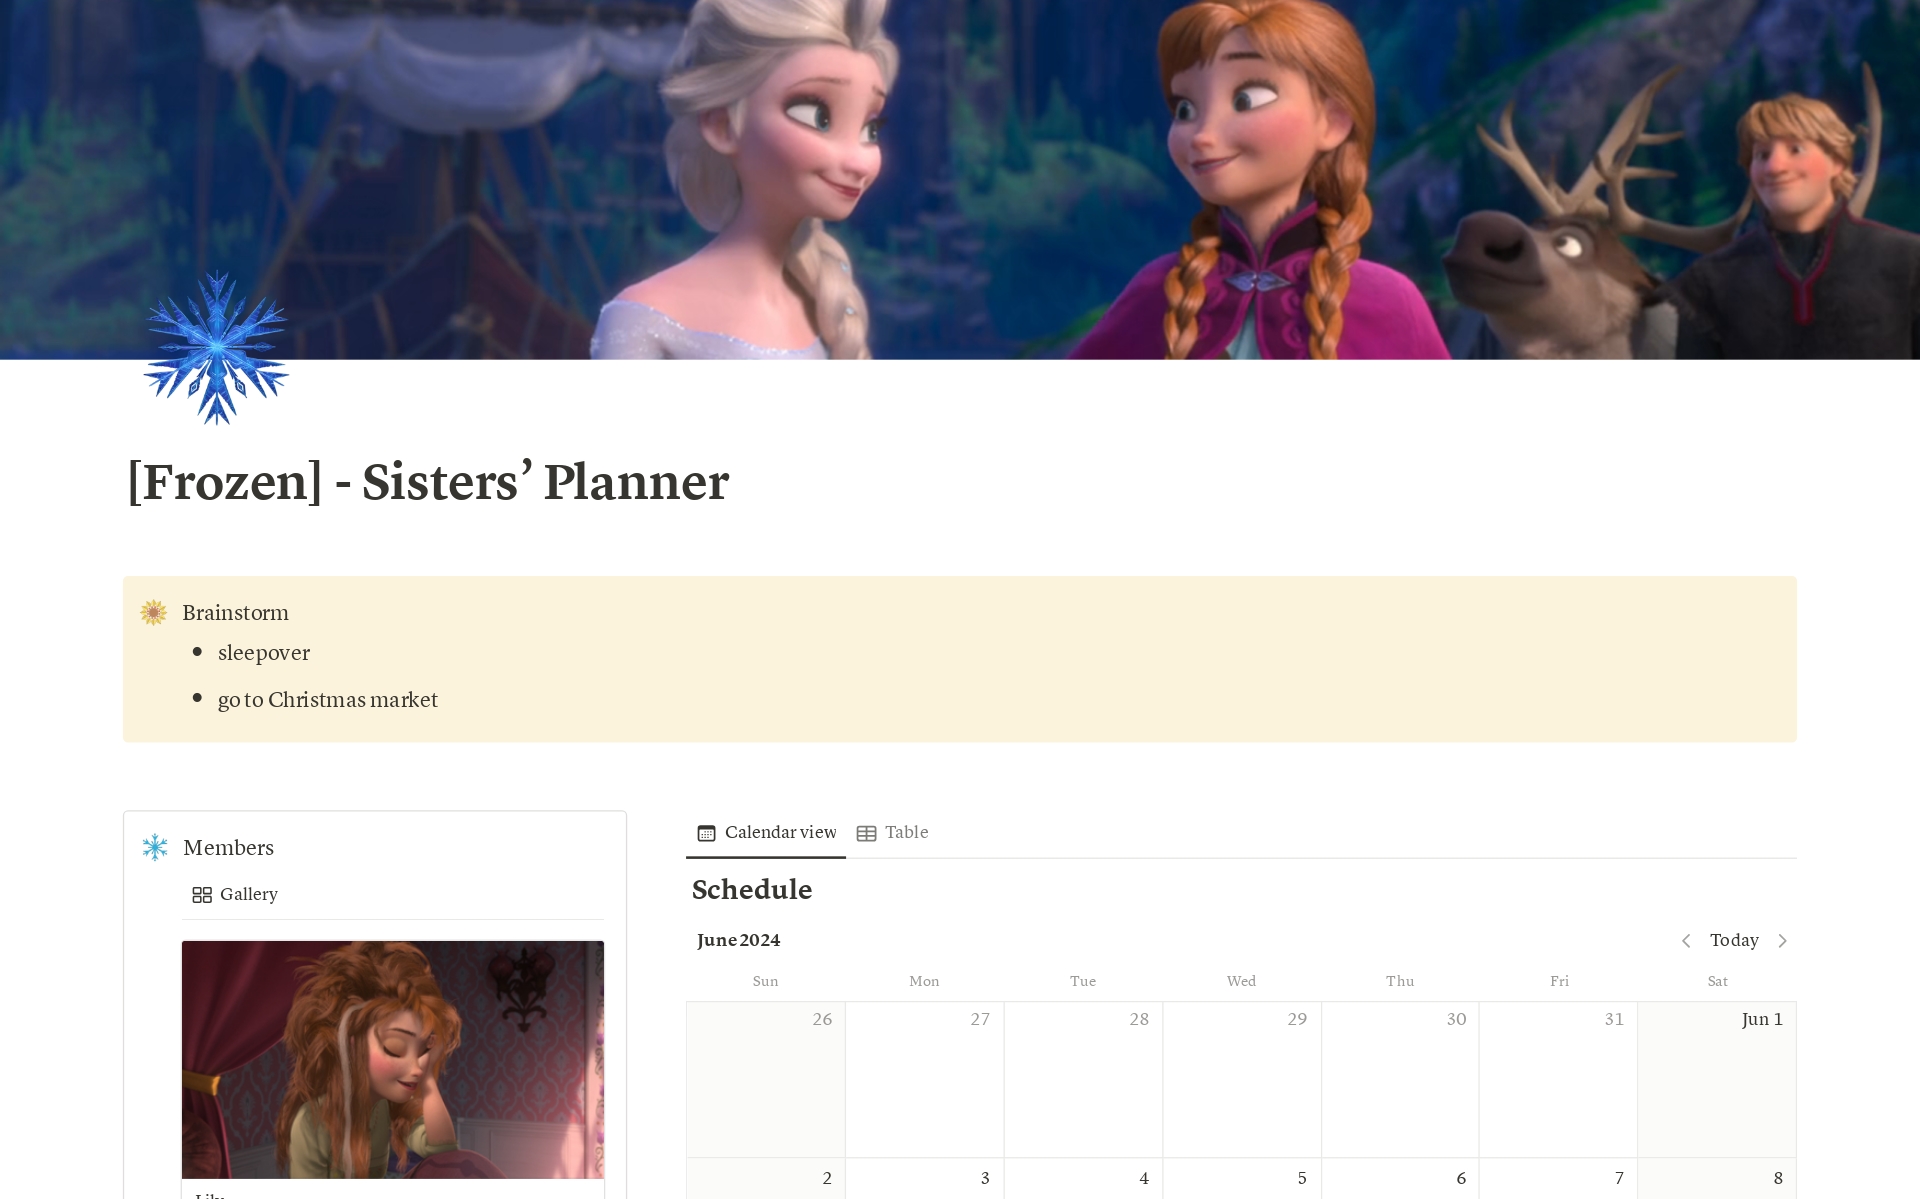 [Frozen] - Sisters' Planner
A simple template for planning activities with your sister(s)
for Amalka